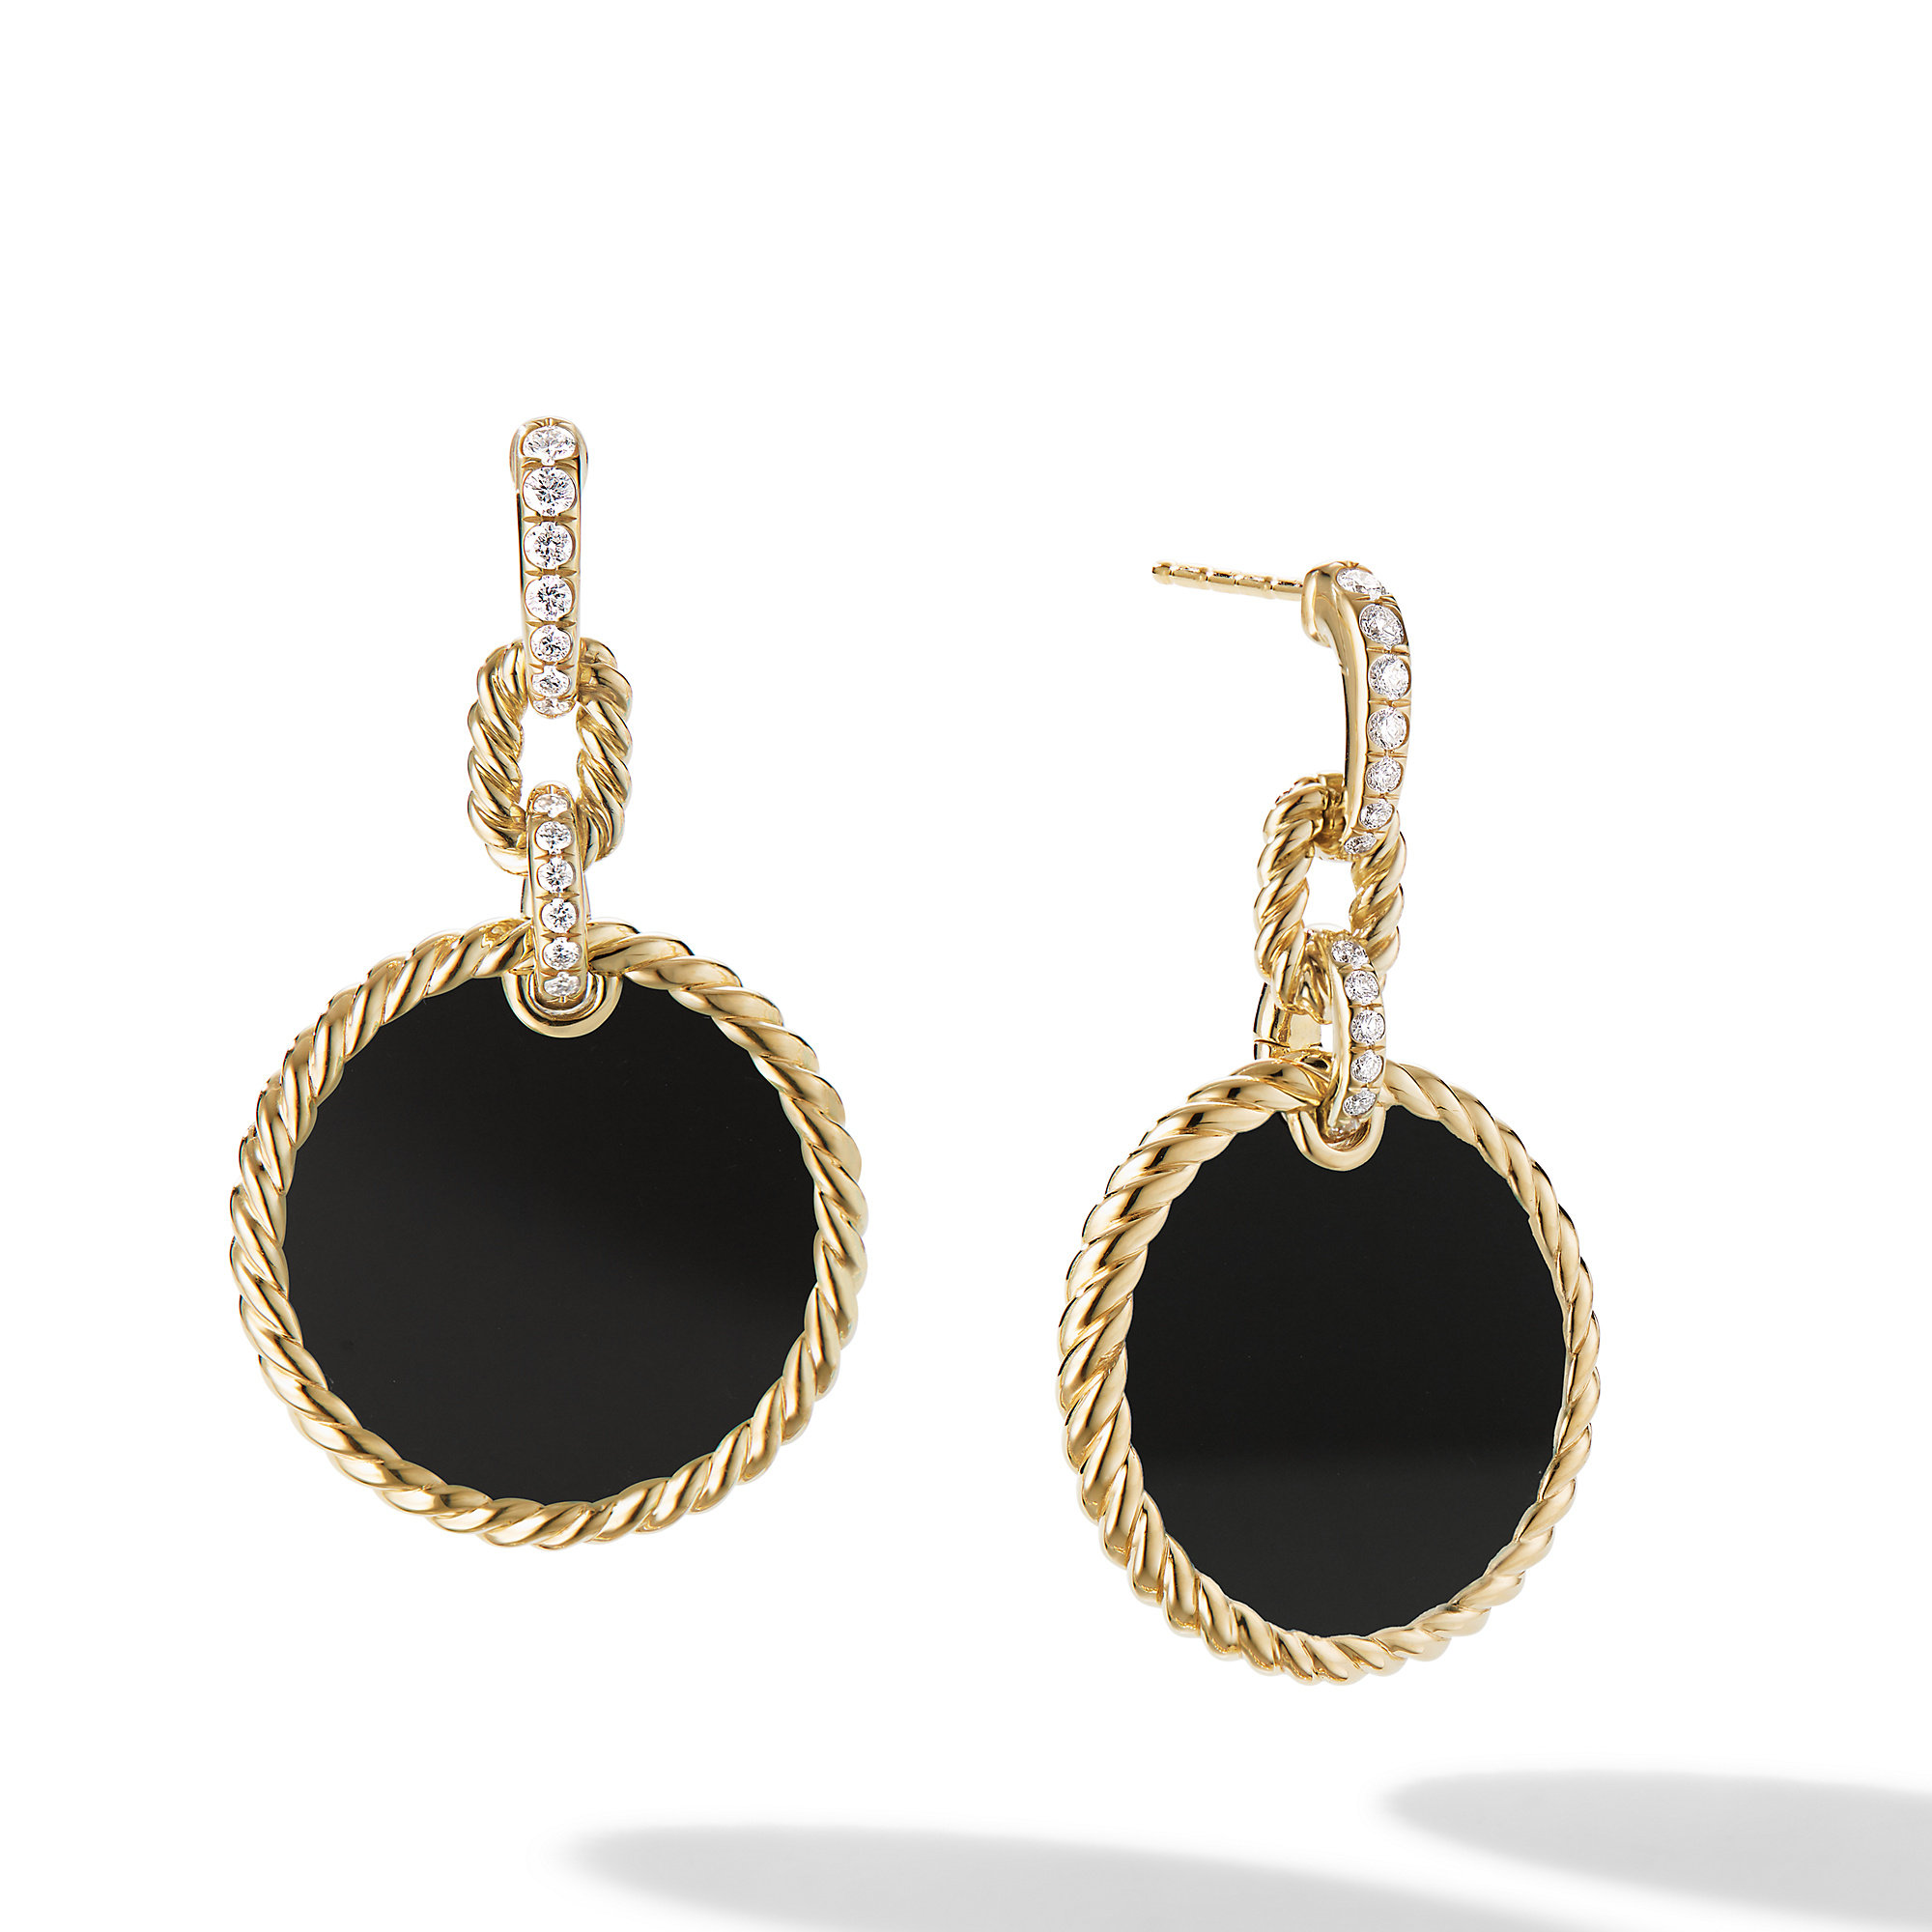 DY Elements® Convertible Drop Earrings in 18K Yellow Gold with Black Onyx and Pave Diamonds